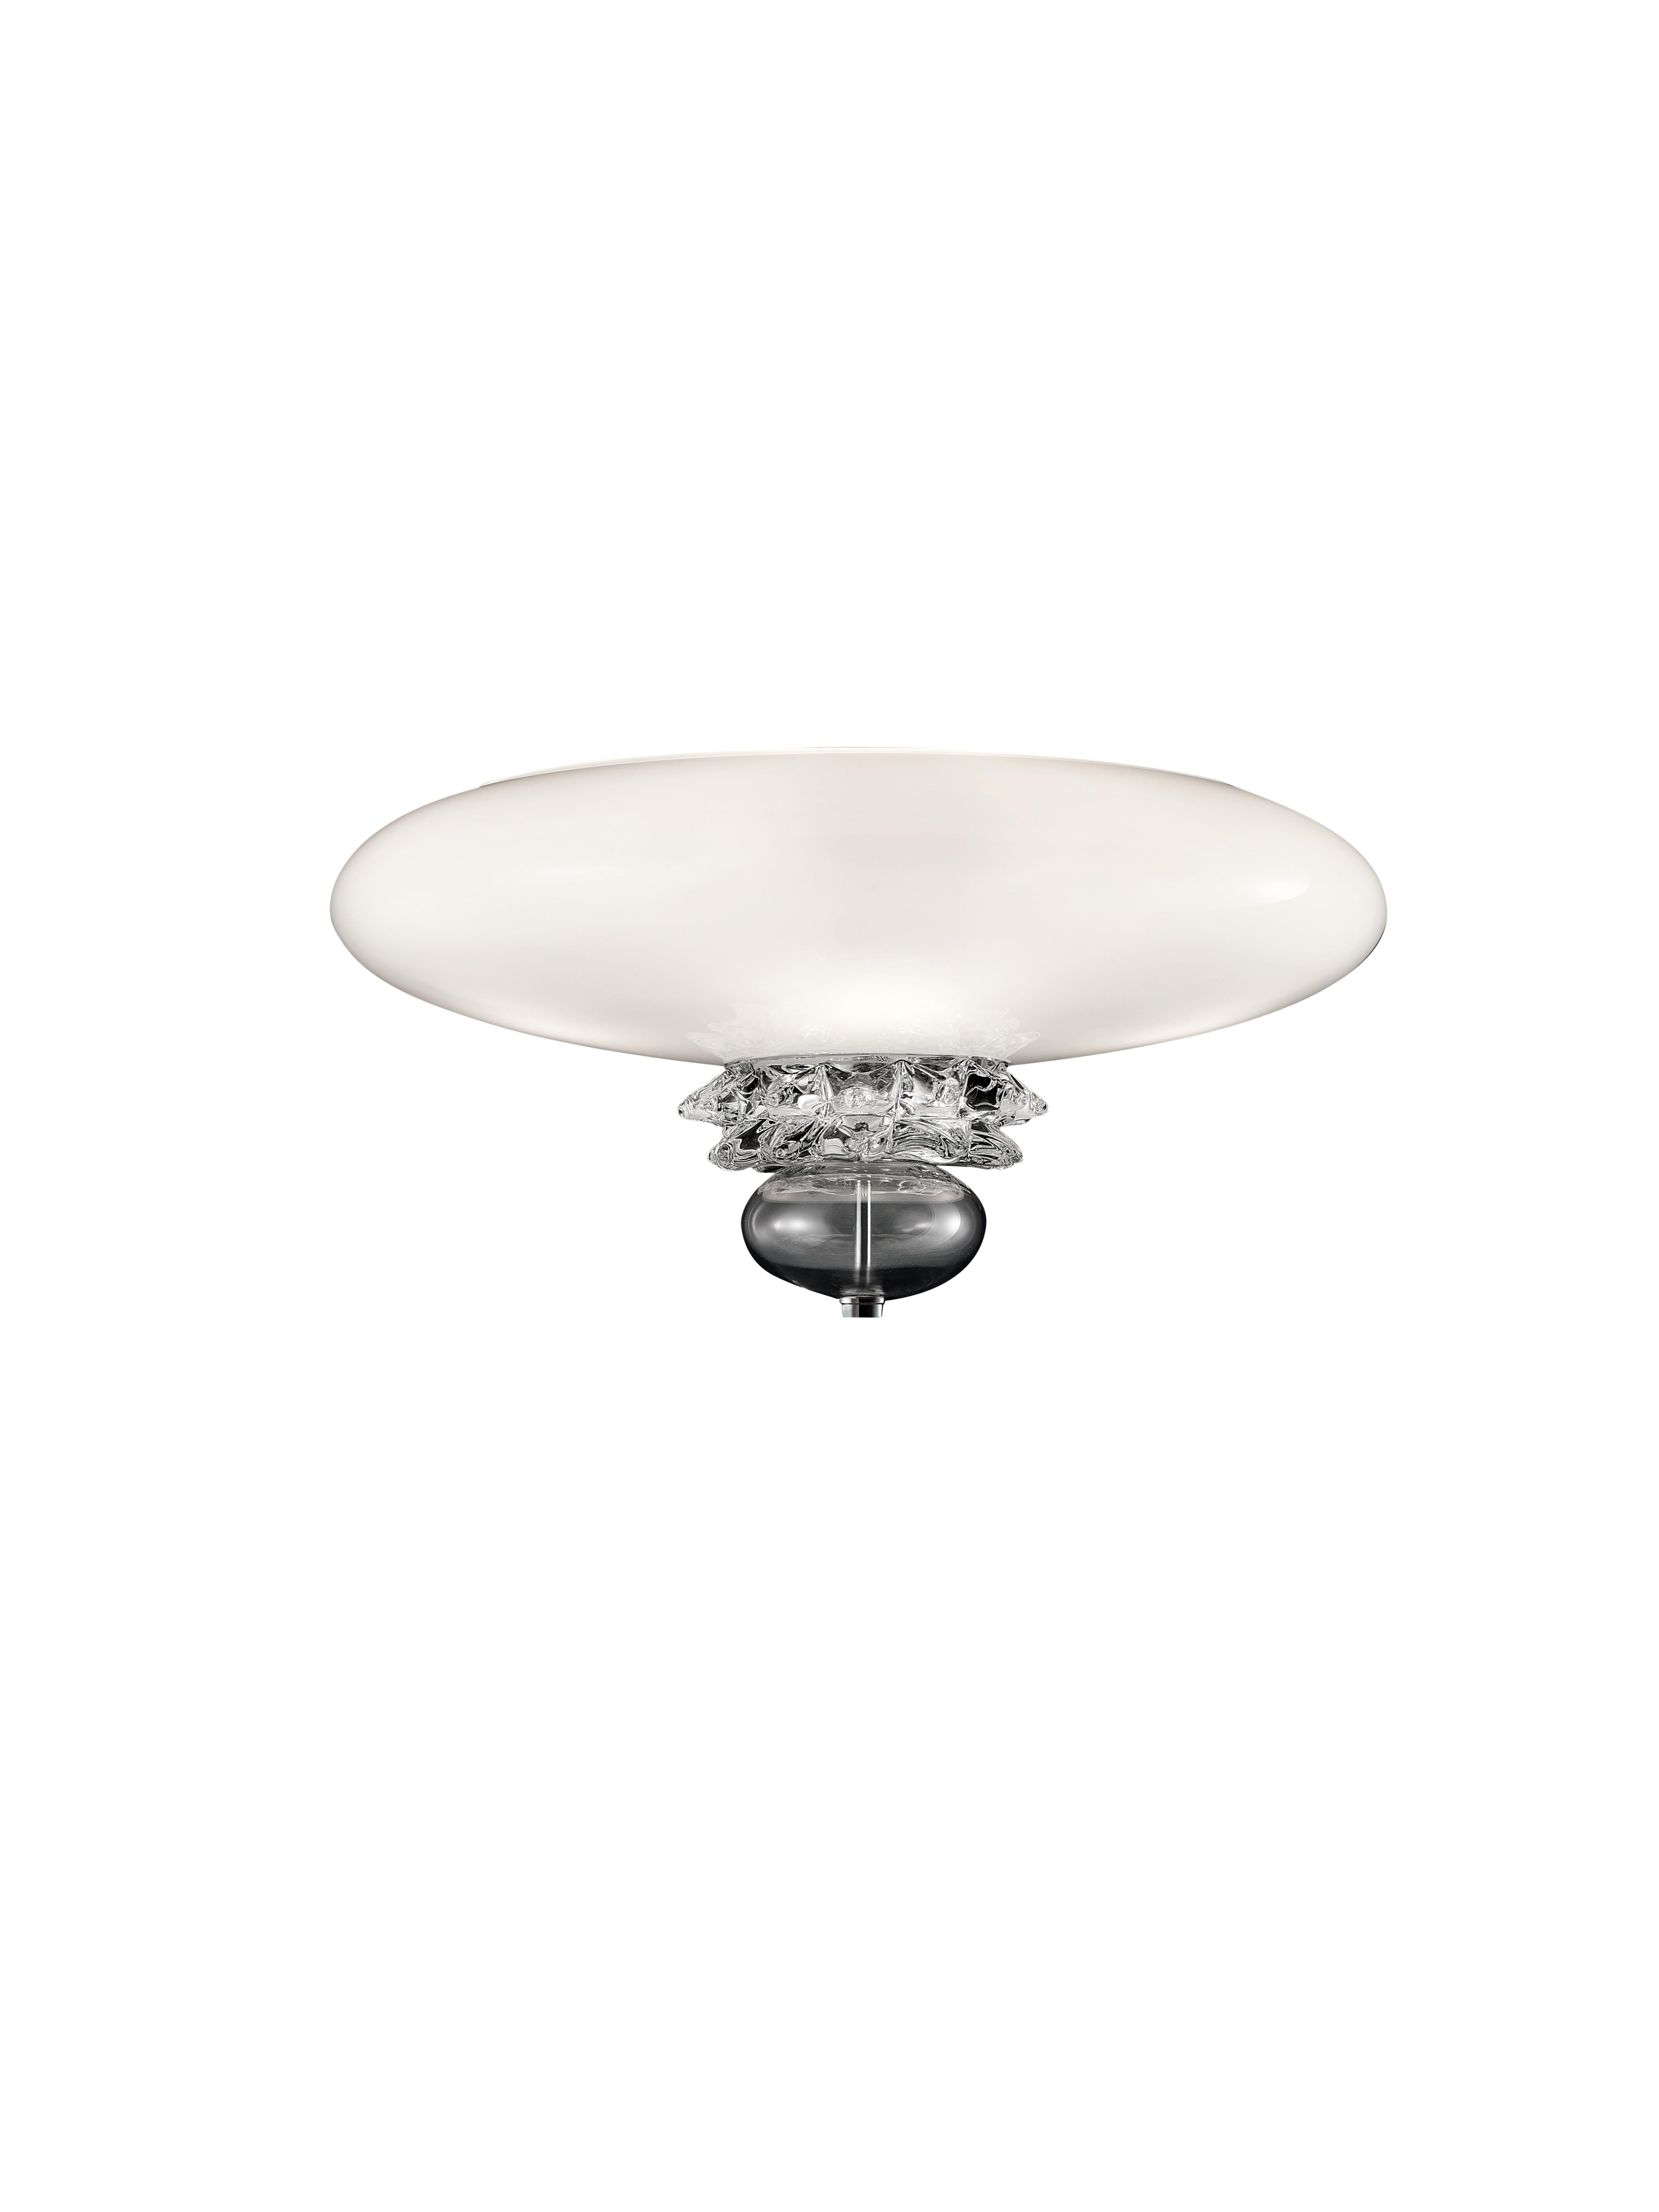 Clear (Grey/White_IN) Anversa 5699 Wall Sconce in Chrome and Glass, by Barovier&Toso